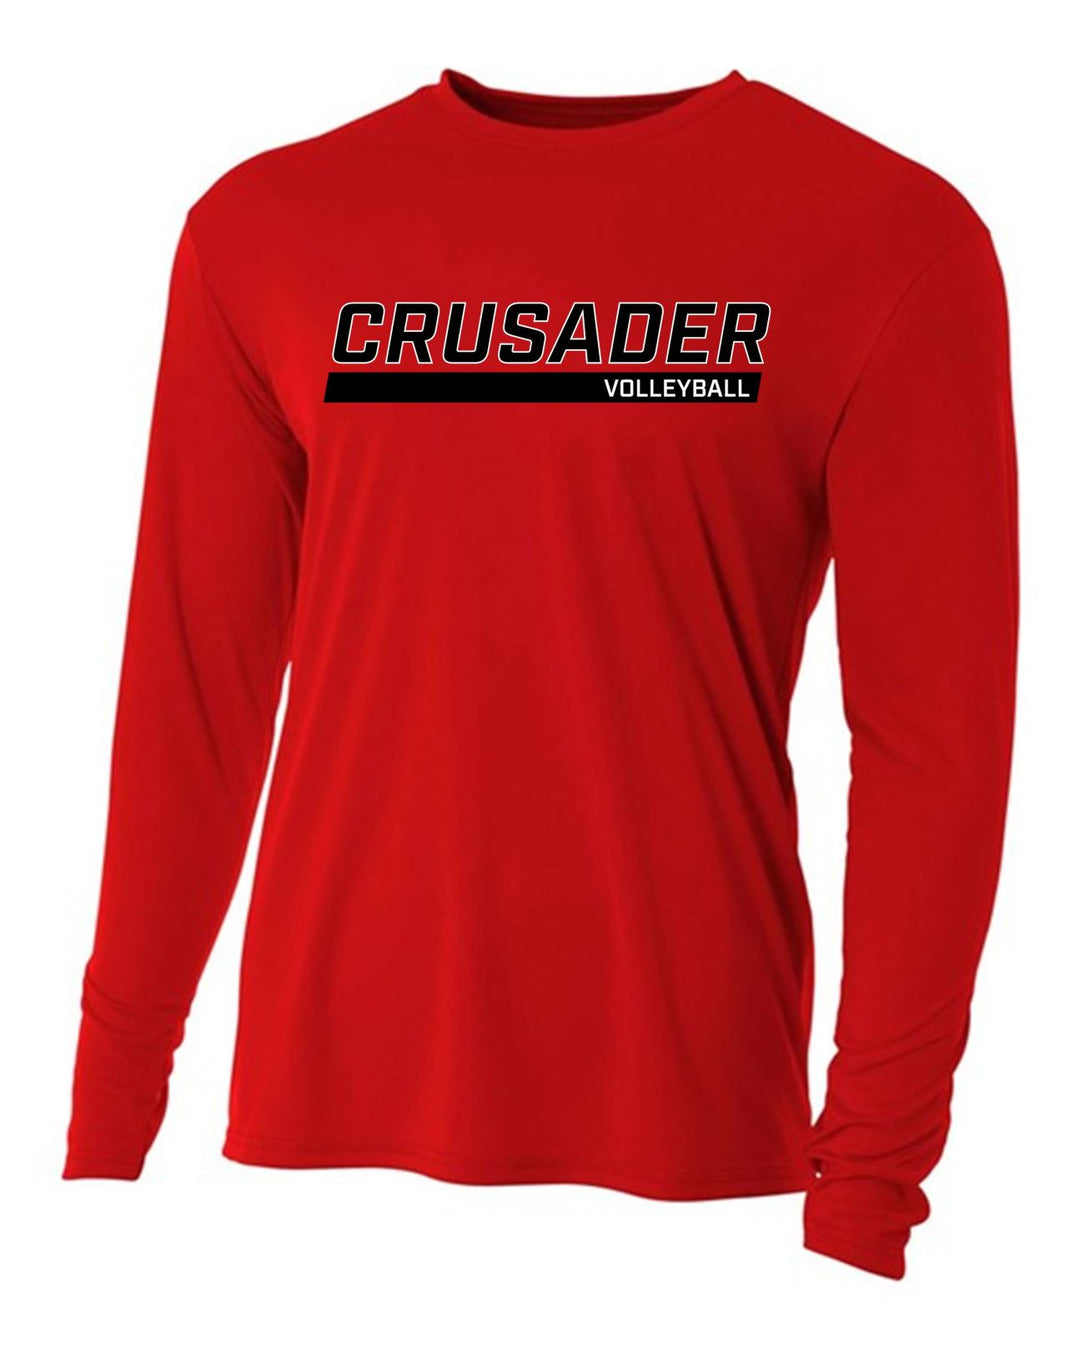 WCU Volleyball Youth Long-Sleeve Performance Shirt WCU Volleyball Red CRUSADER - Third Coast Soccer